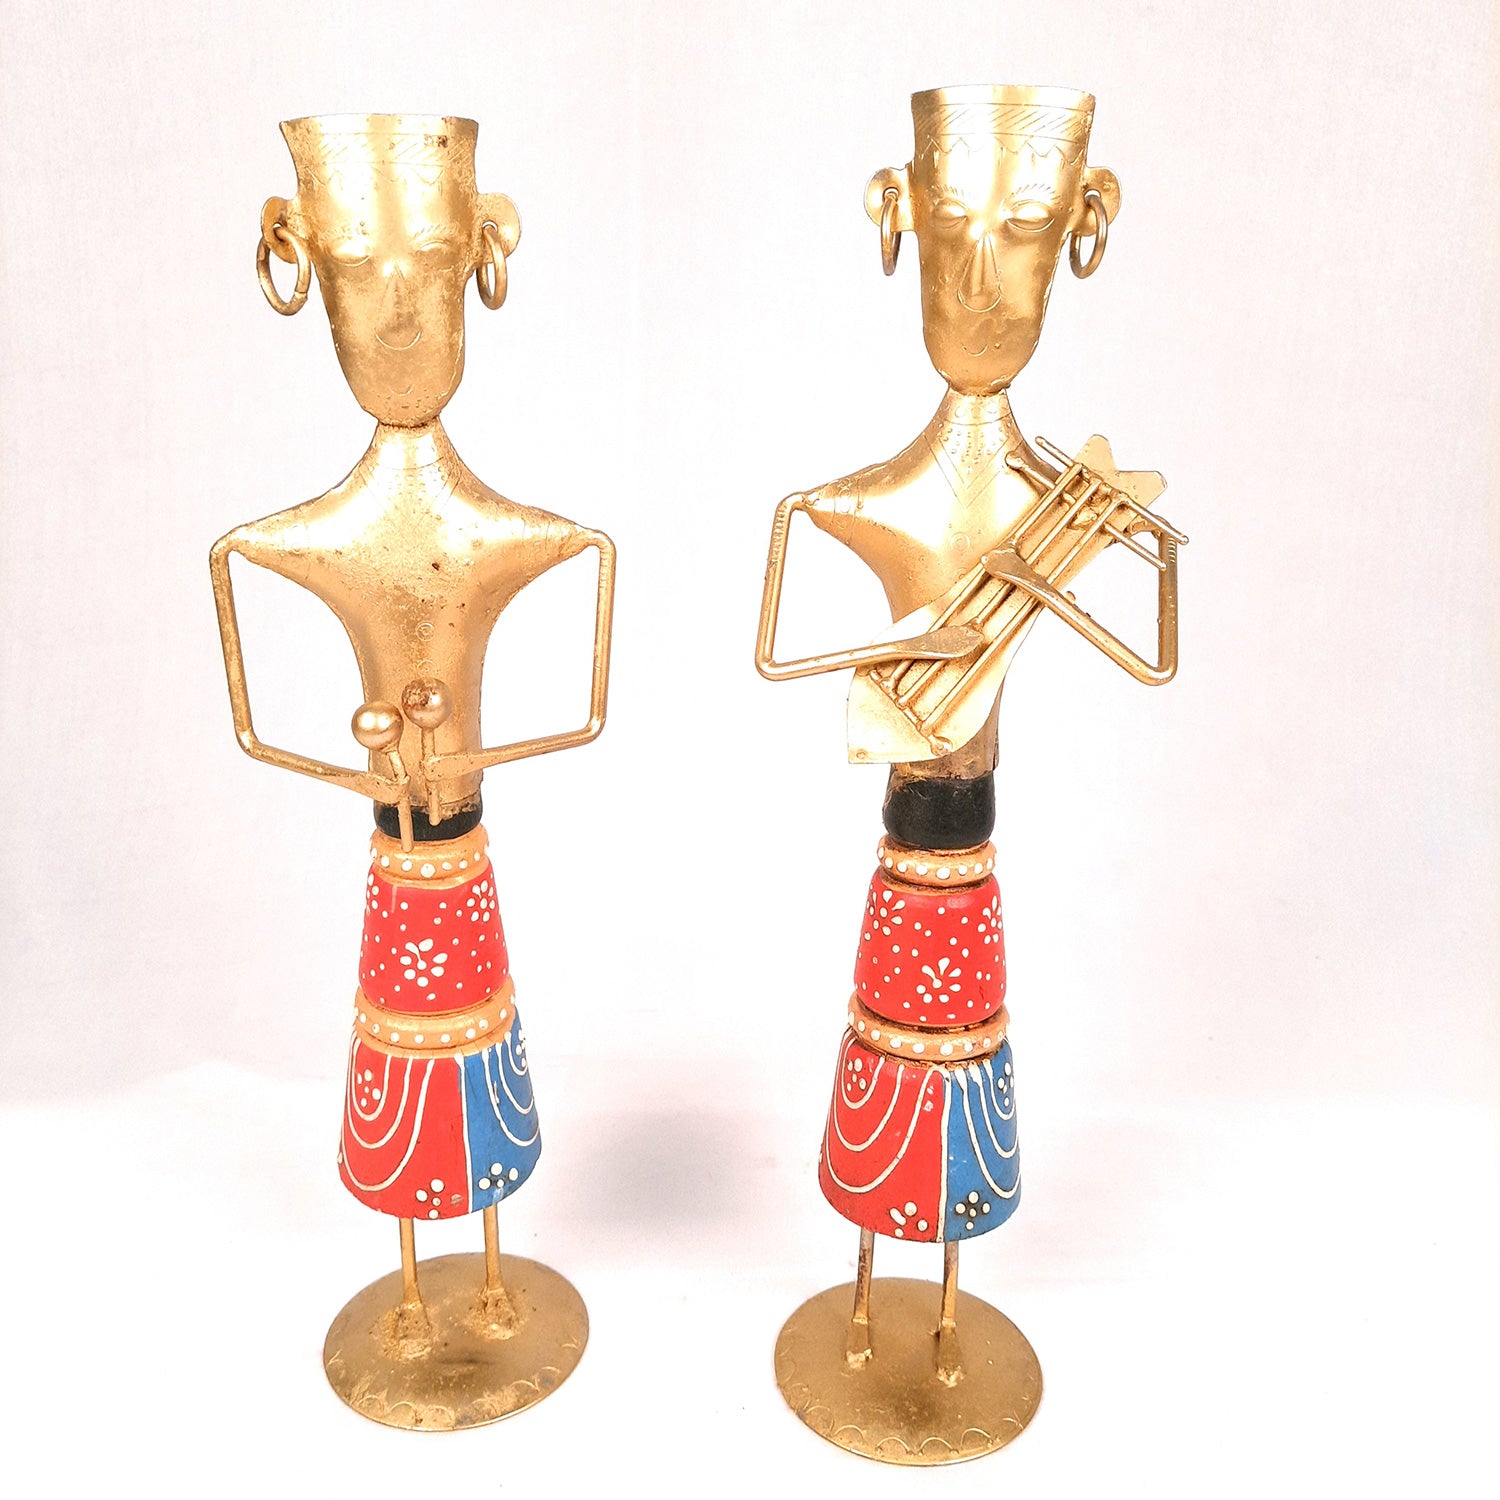 Showpiece Musician Set | Tribal Musician Figurine - For Home, Table, Living Room & TV Unit Decor | Show Piece For Office Desk & Gifts - 12 Inch (Set of 2)